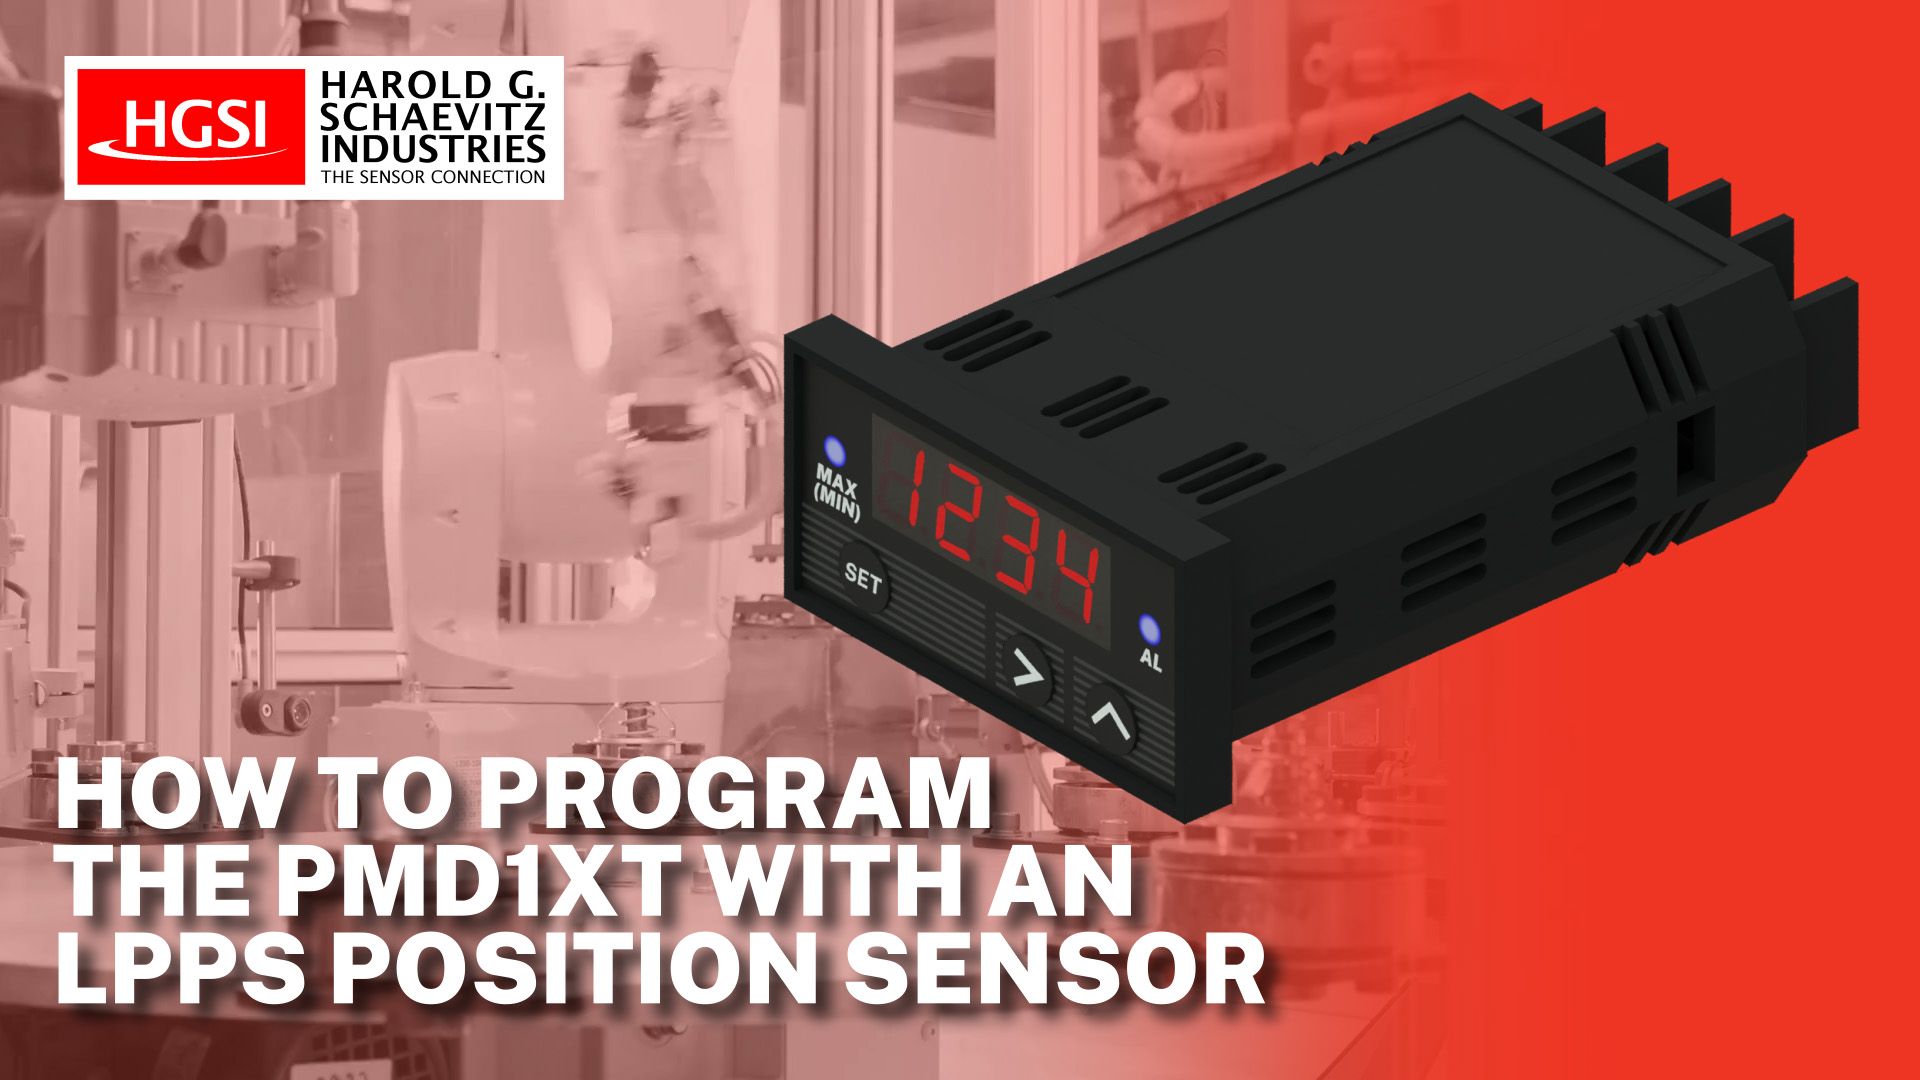 How to Program PMD1XT Readout with LPPS Series Linear Potentiometer